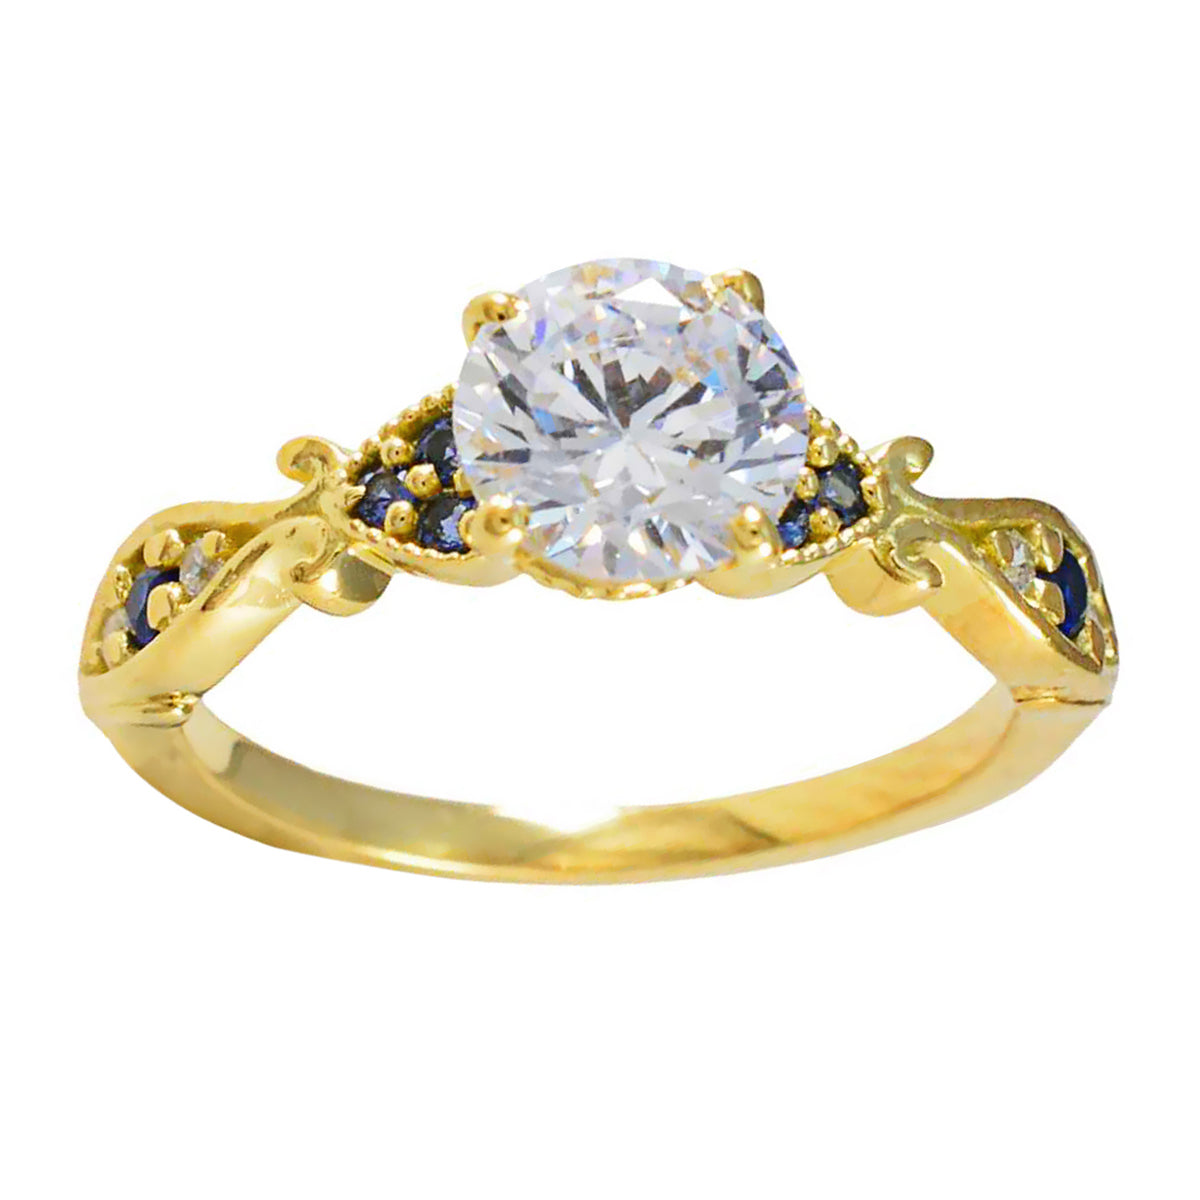 Riyo Lovable Silver Ring With Yellow Gold Plating Blue Sapphire CZ Stone Round Shape Prong Setting Antique Jewelry Valentines Day Ring